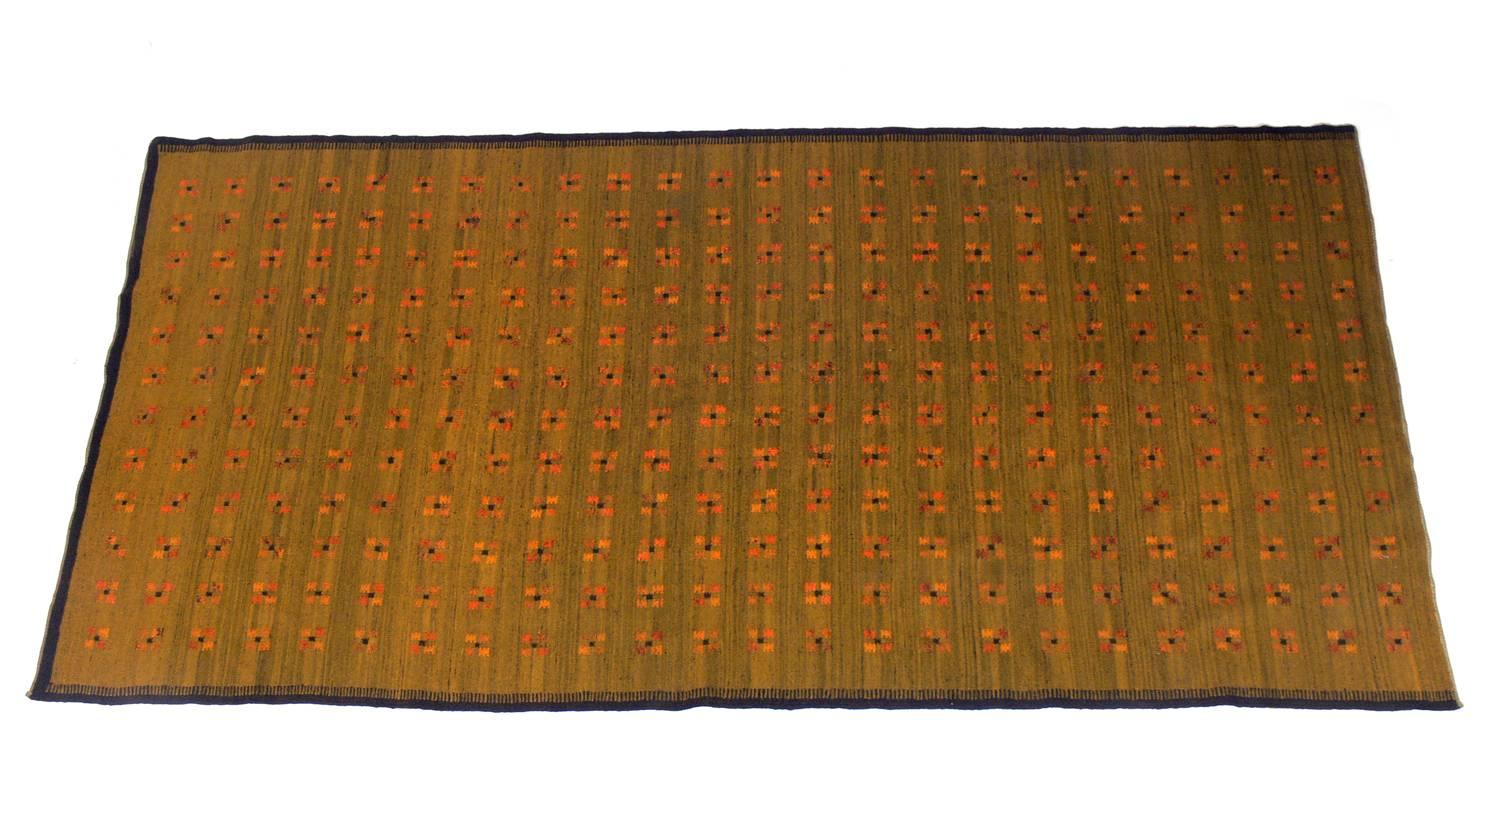 Danish Modern flat-weave Carpet, probably Swedish, circa 1950s. Nice tight weave with a beautiful design in goldenrod yellows on a green field. This rug is an impressive size at 10.5' x 5'.